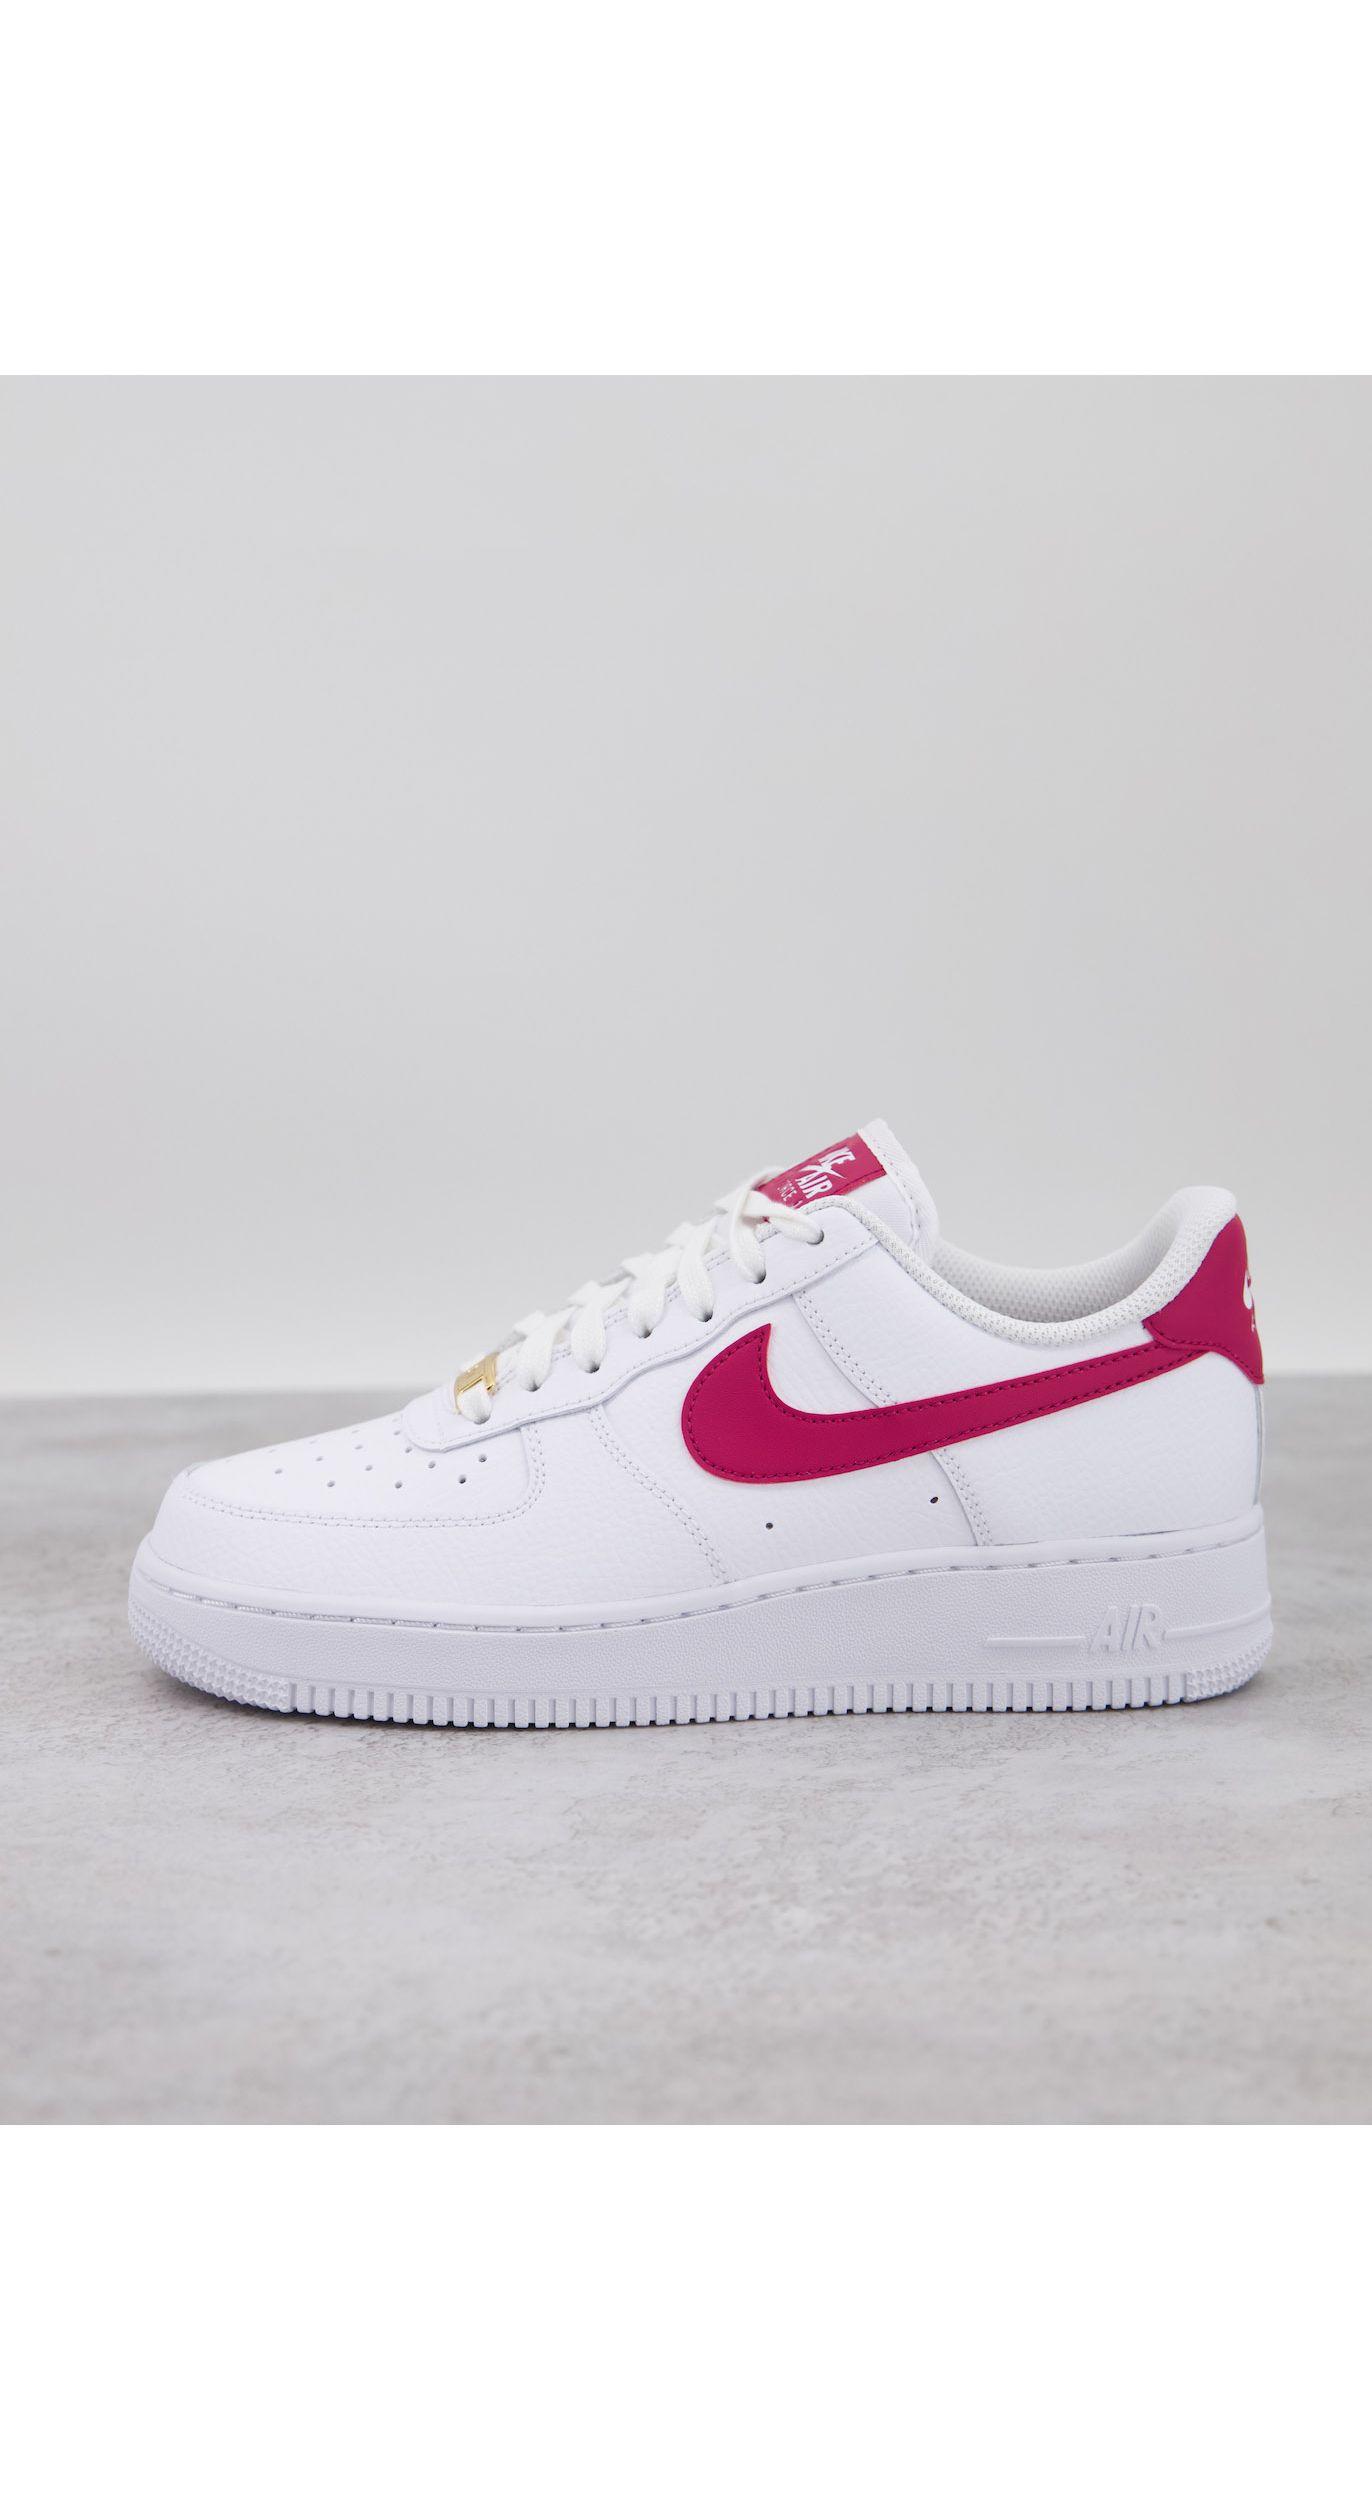 Nike – air force 1 '07 – sneaker und edlem rot in Weiß | Lyst AT